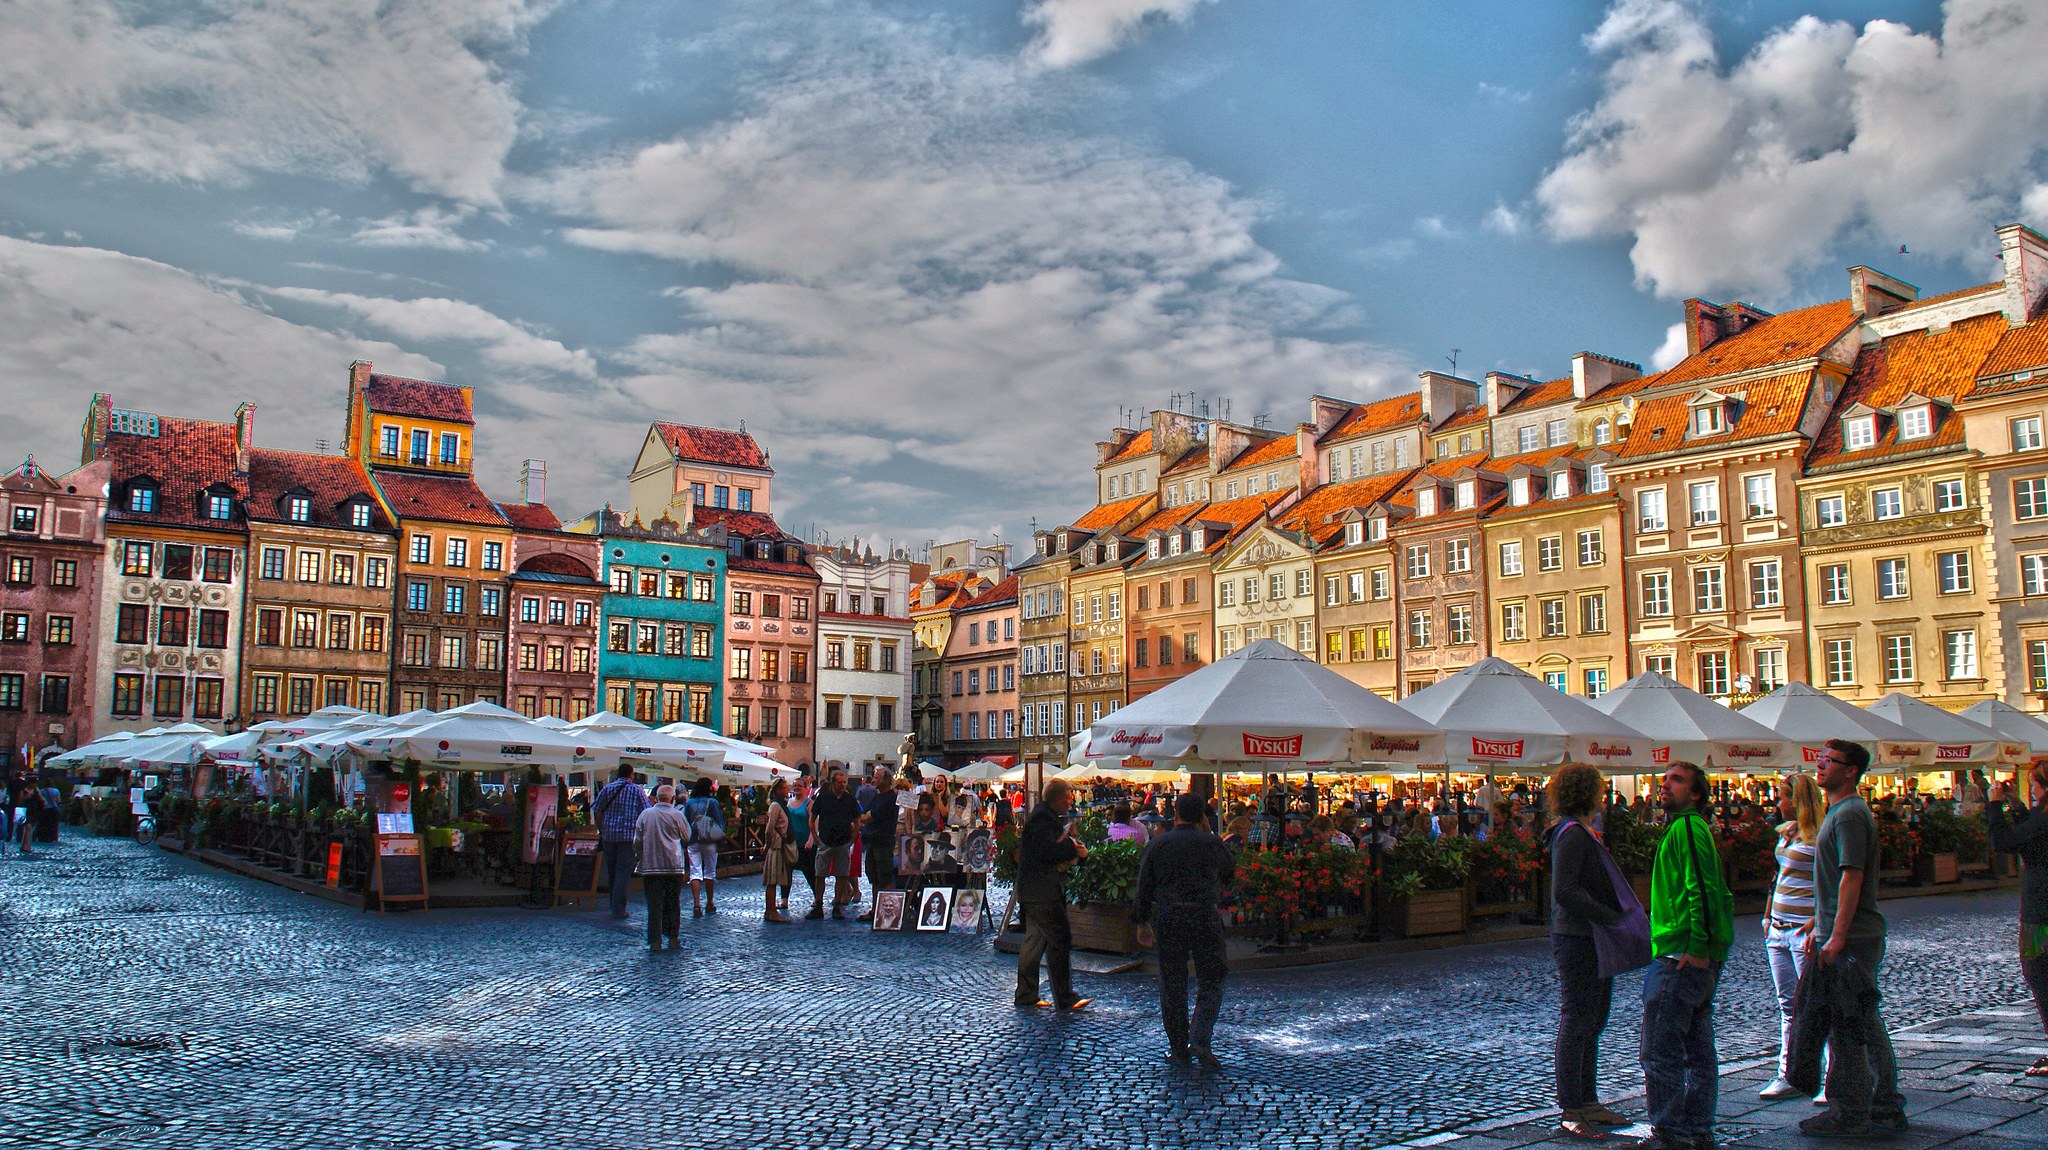 Warsaw old town market square